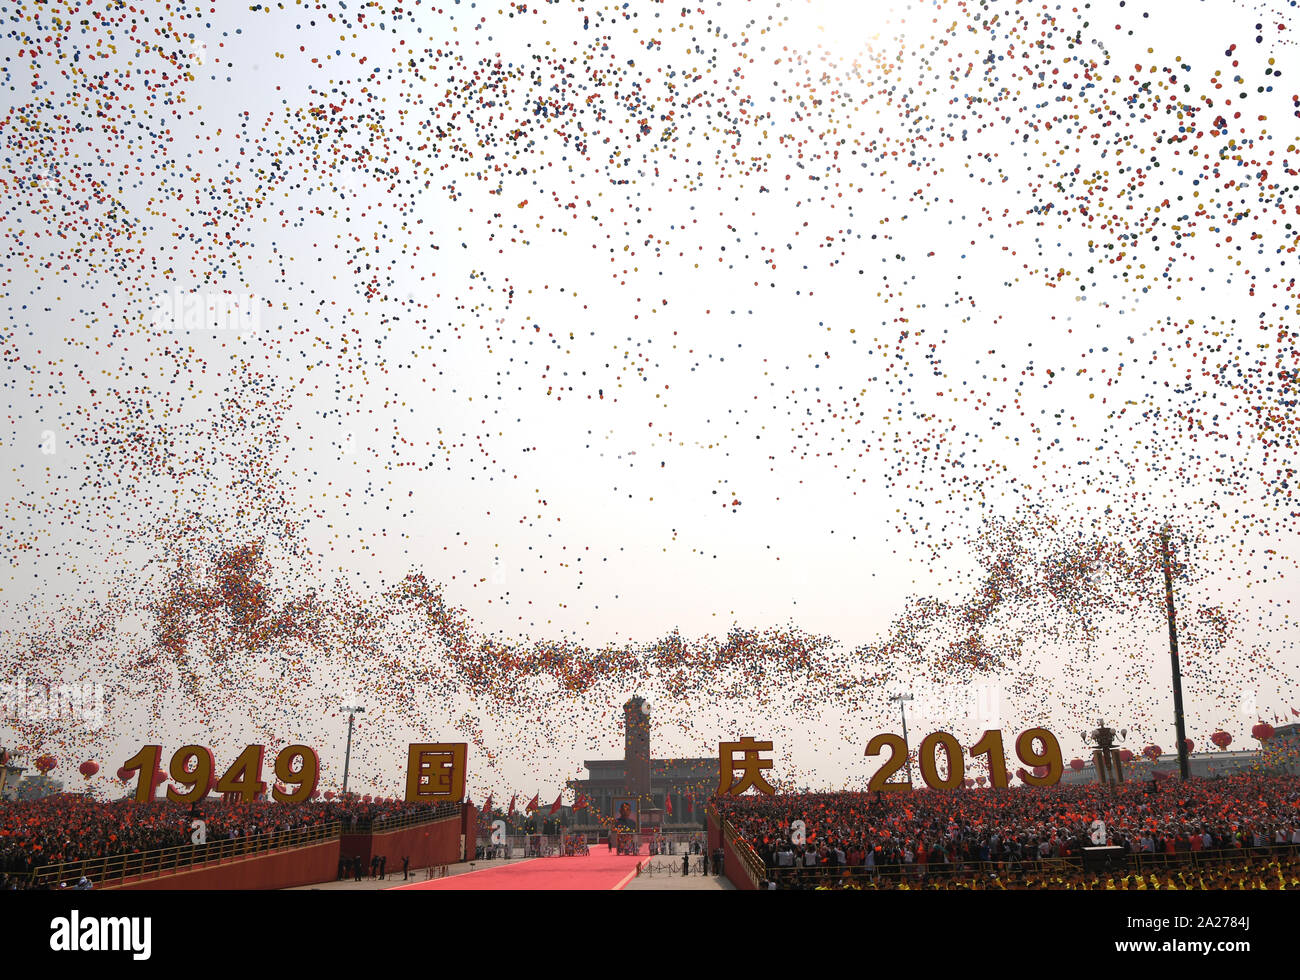 Beijing, China. 1st Oct, 2019. Balloons are released to the sky during the celebrations for the 70th founding anniversary of the People's Republic of China (PRC) in Beijing, capital of China, Oct. 1, 2019. Credit: Yang Zongyou/Xinhua/Alamy Live News Stock Photo